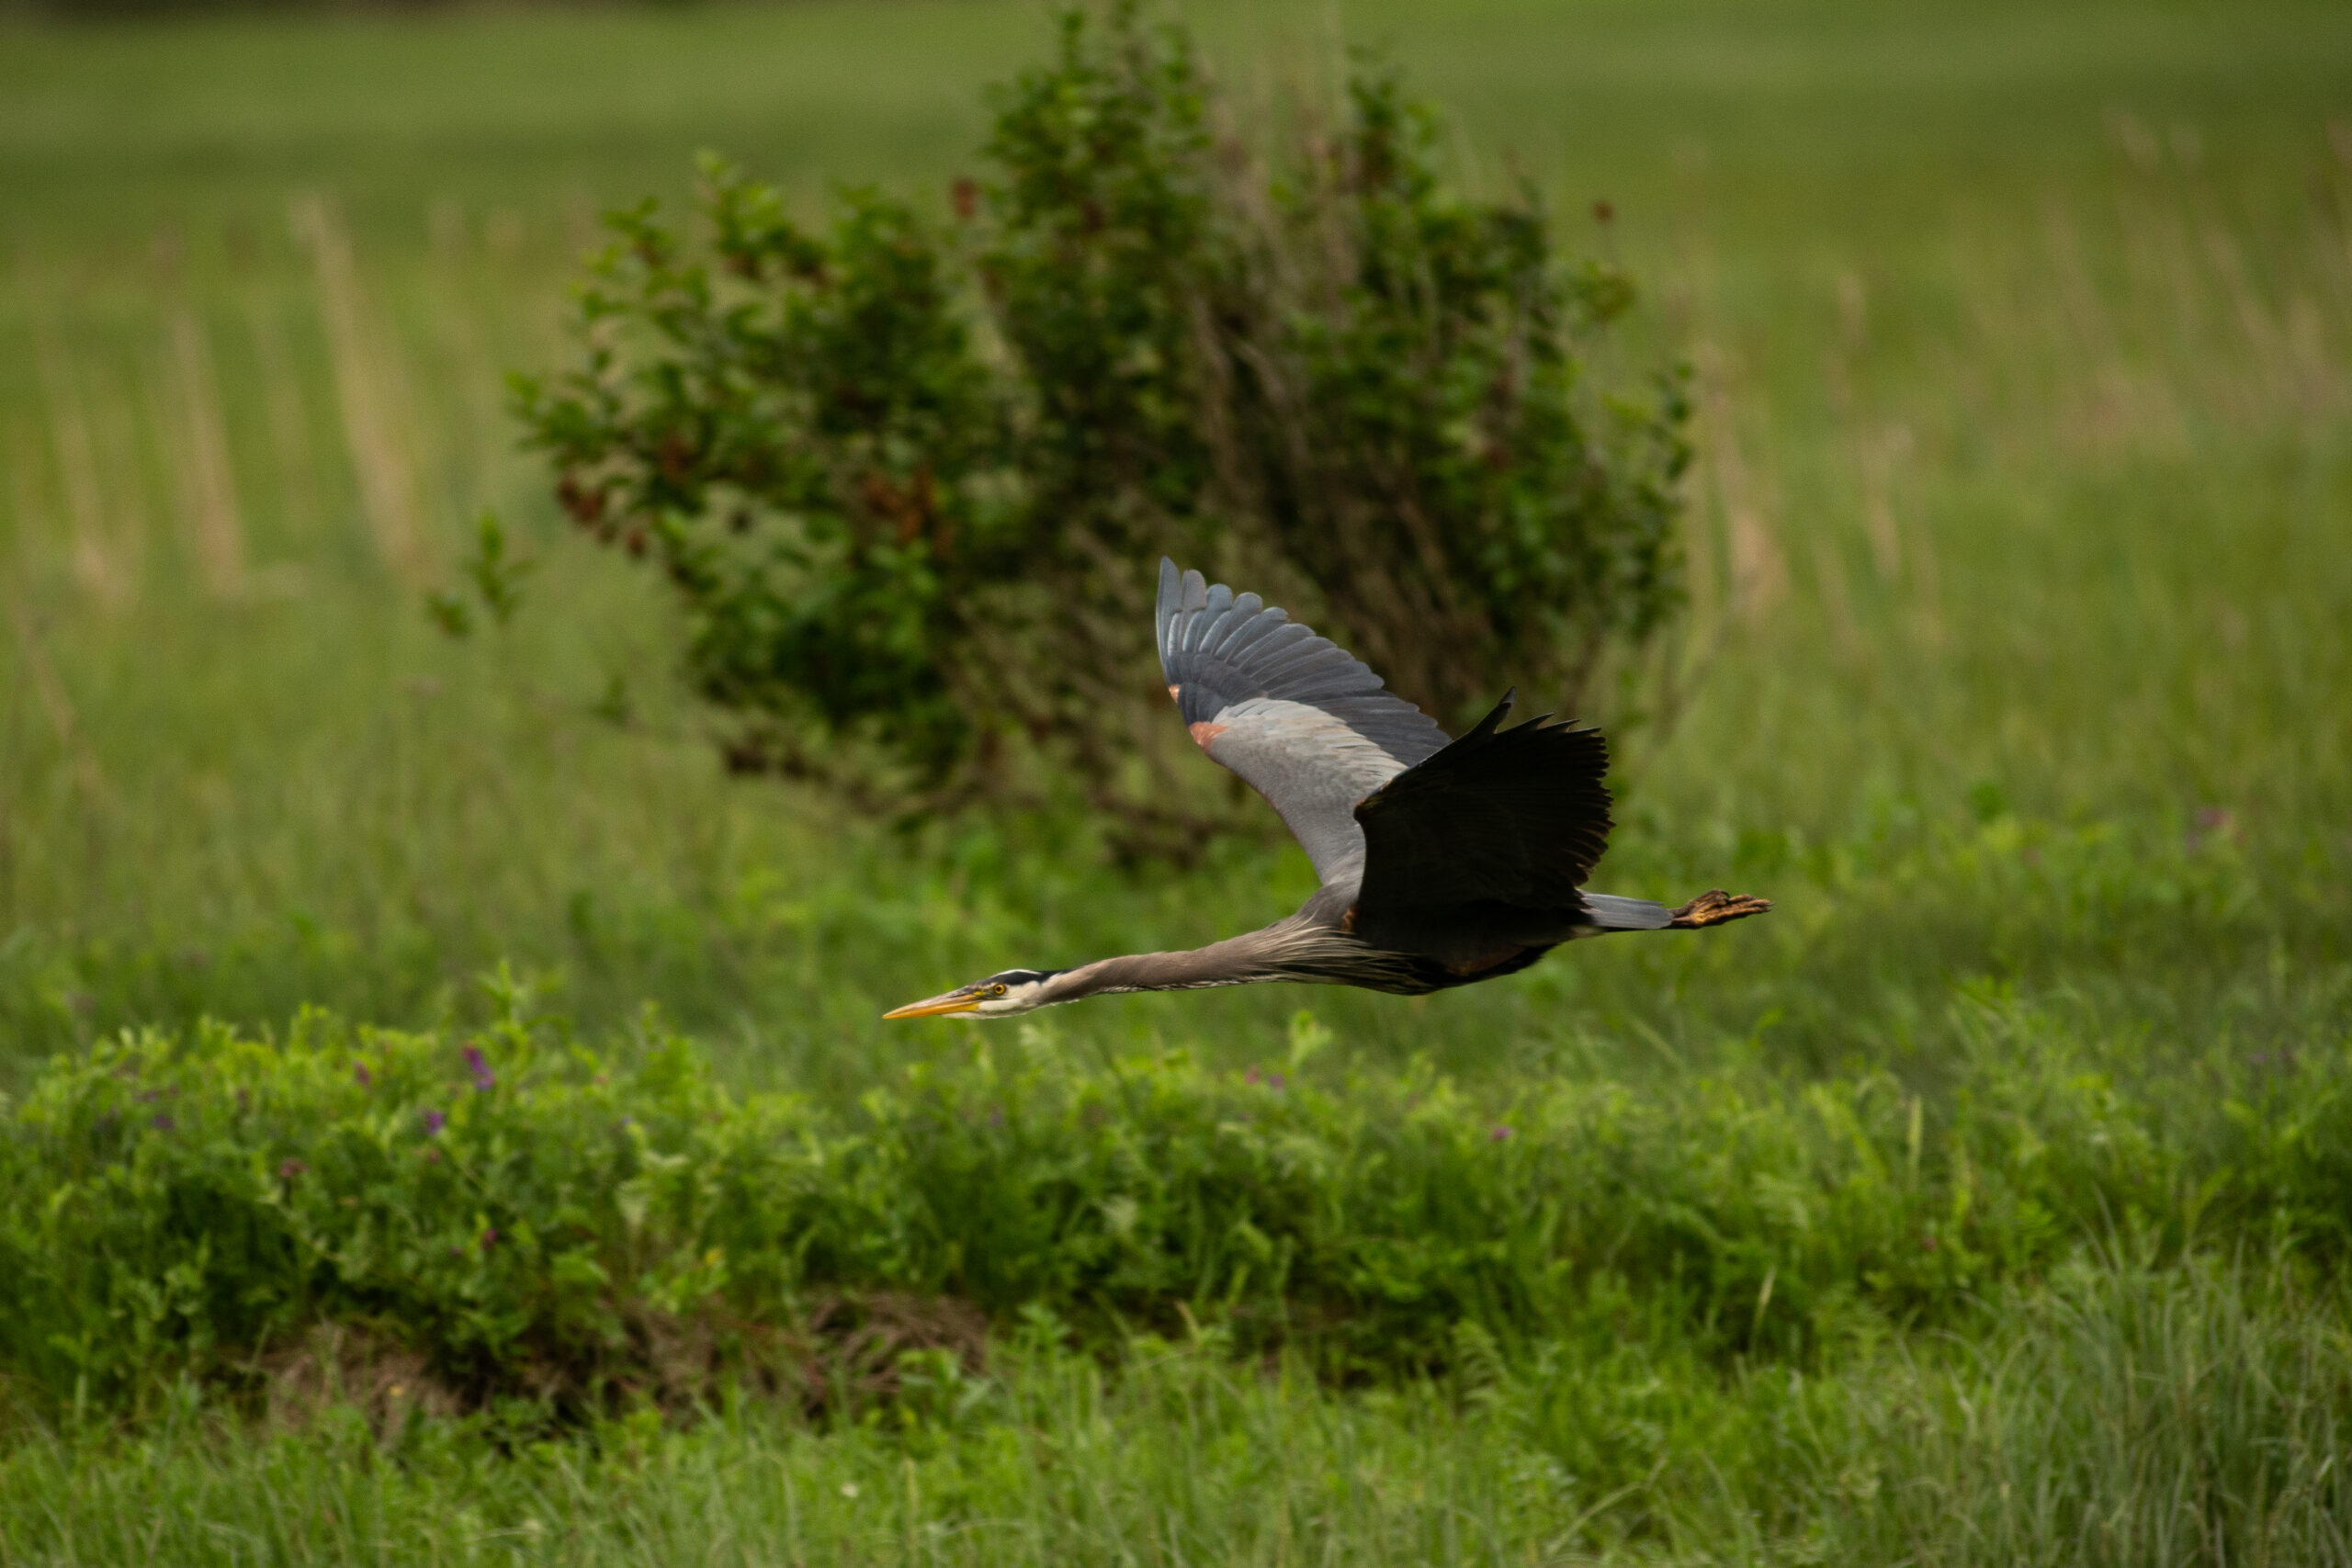 A great blue heron is flying against a backdrop of green grass and trees in the Squamish estuary